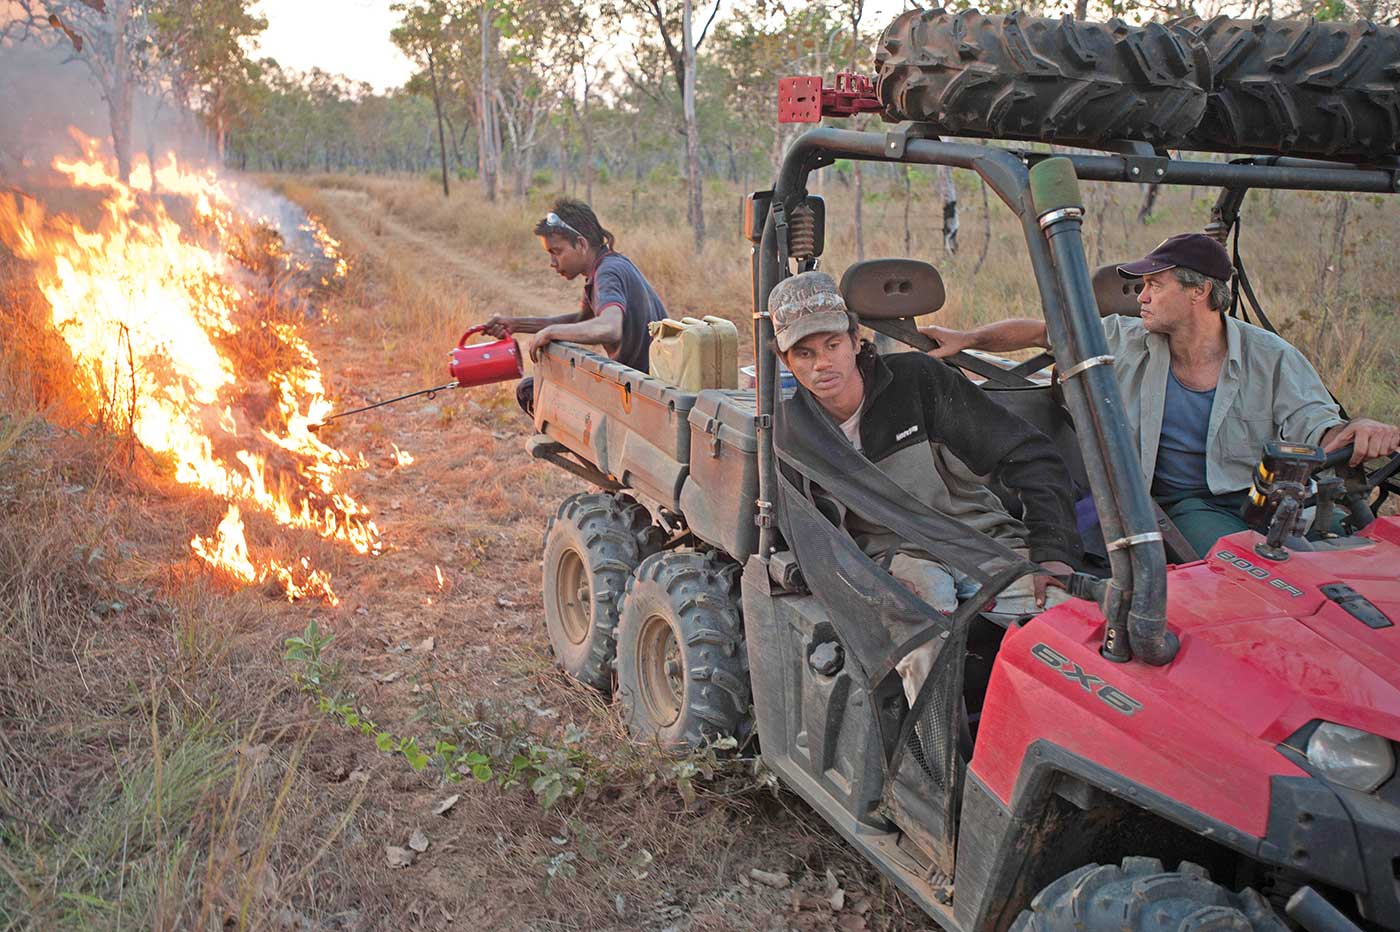 Three people in an all-terrain vehicle in the bush. A man at the back sets alight grass by the roadside.